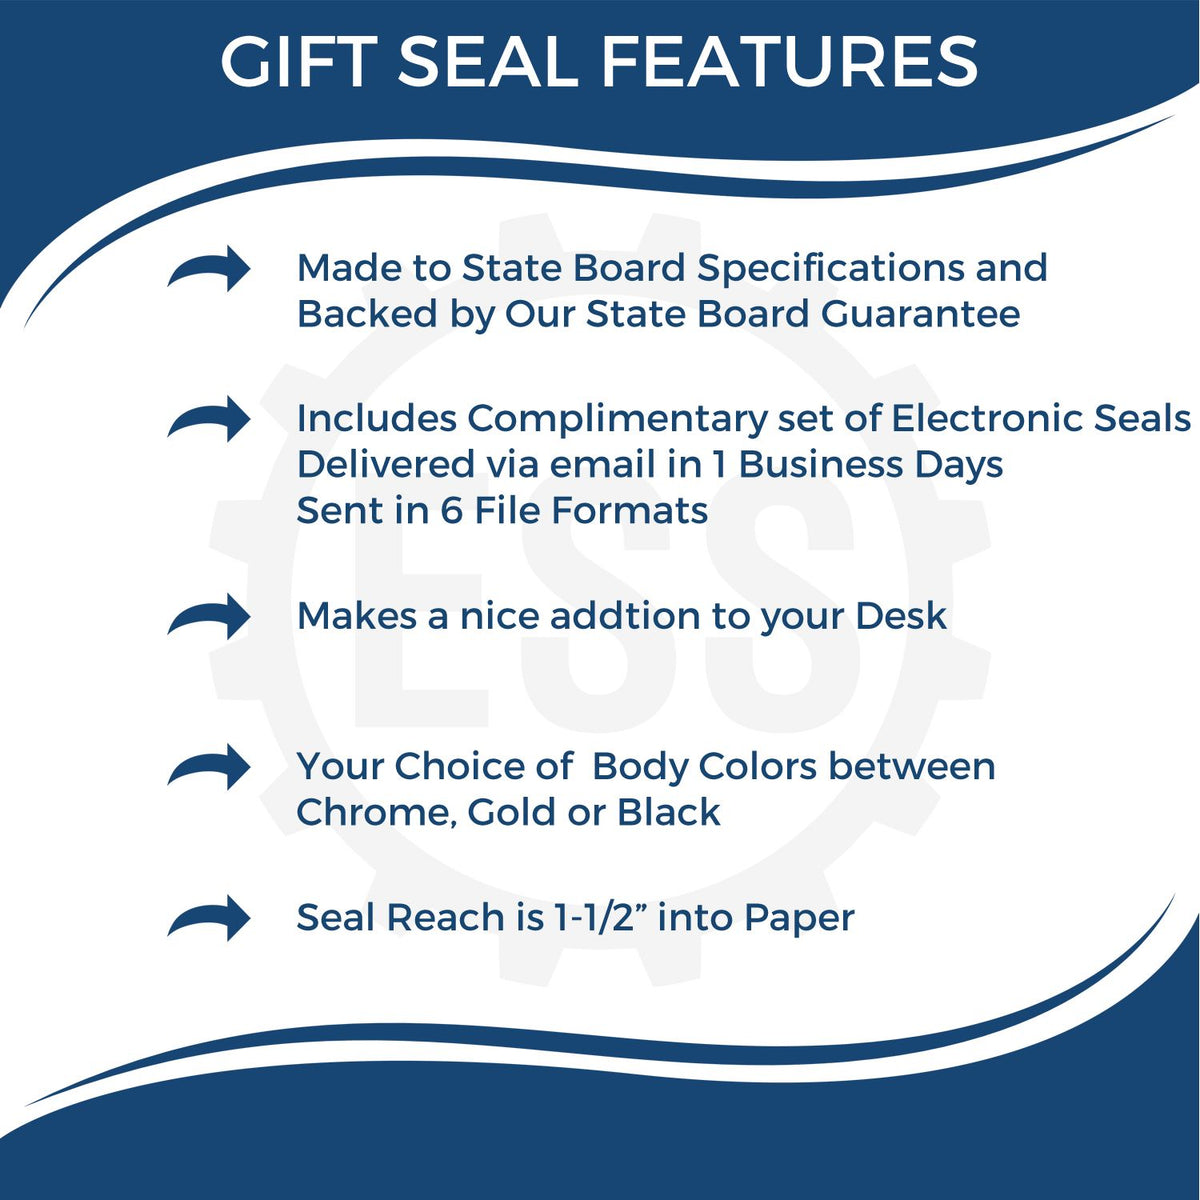 A picture of an infographic highlighting the selling points for the Gift Utah Geologist Seal